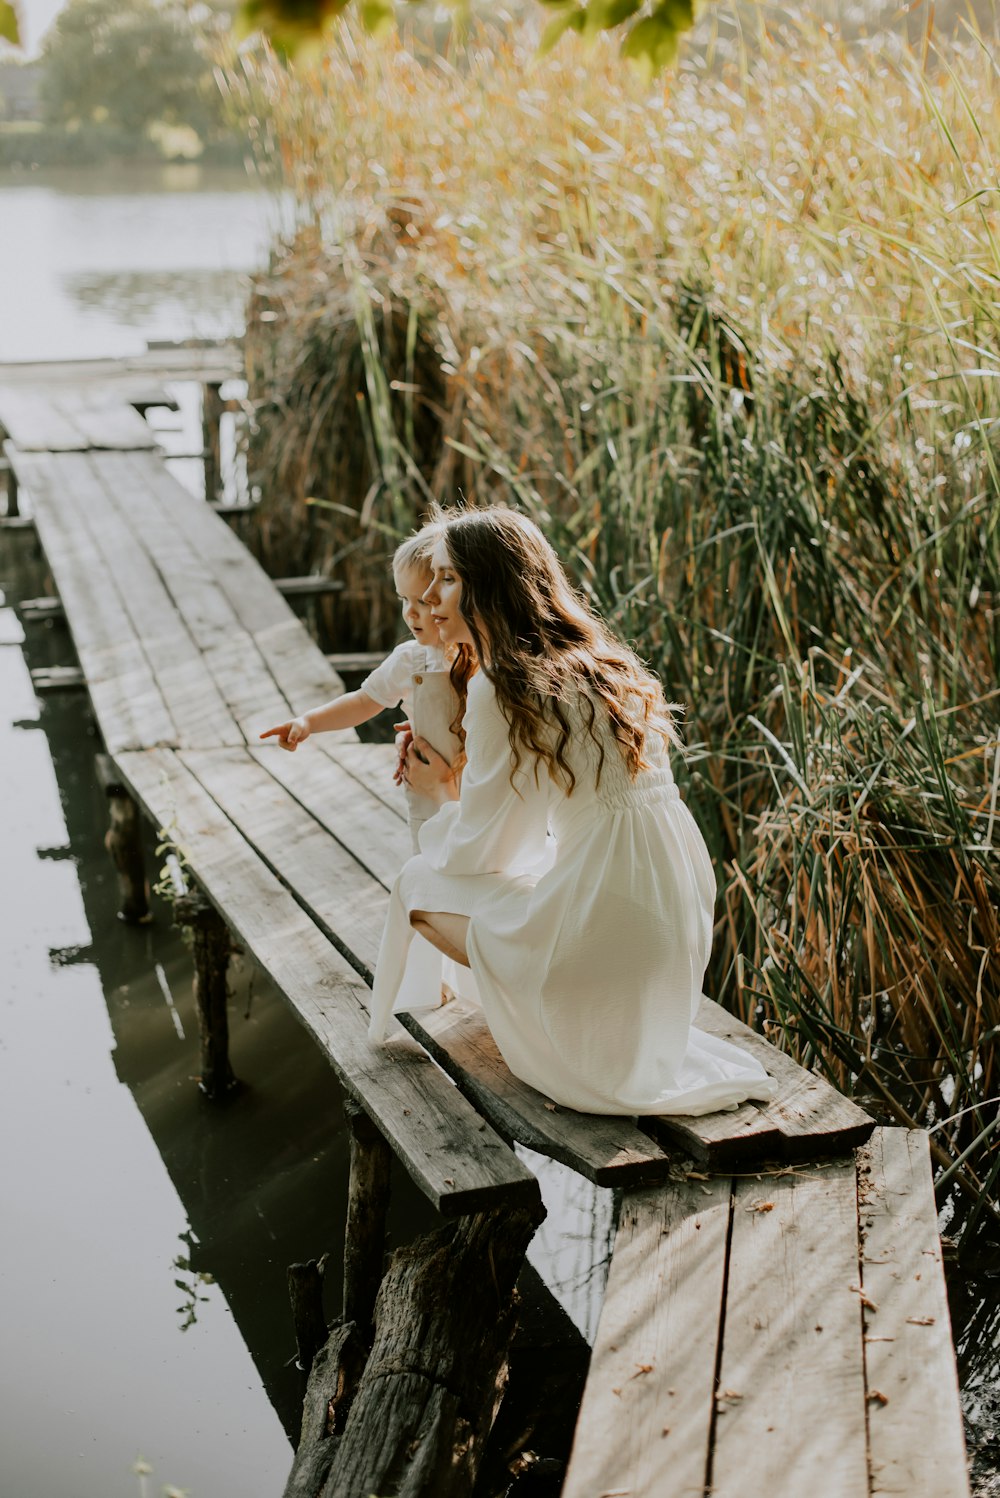 a person in a white dress sitting on a wooden bench in a marsh